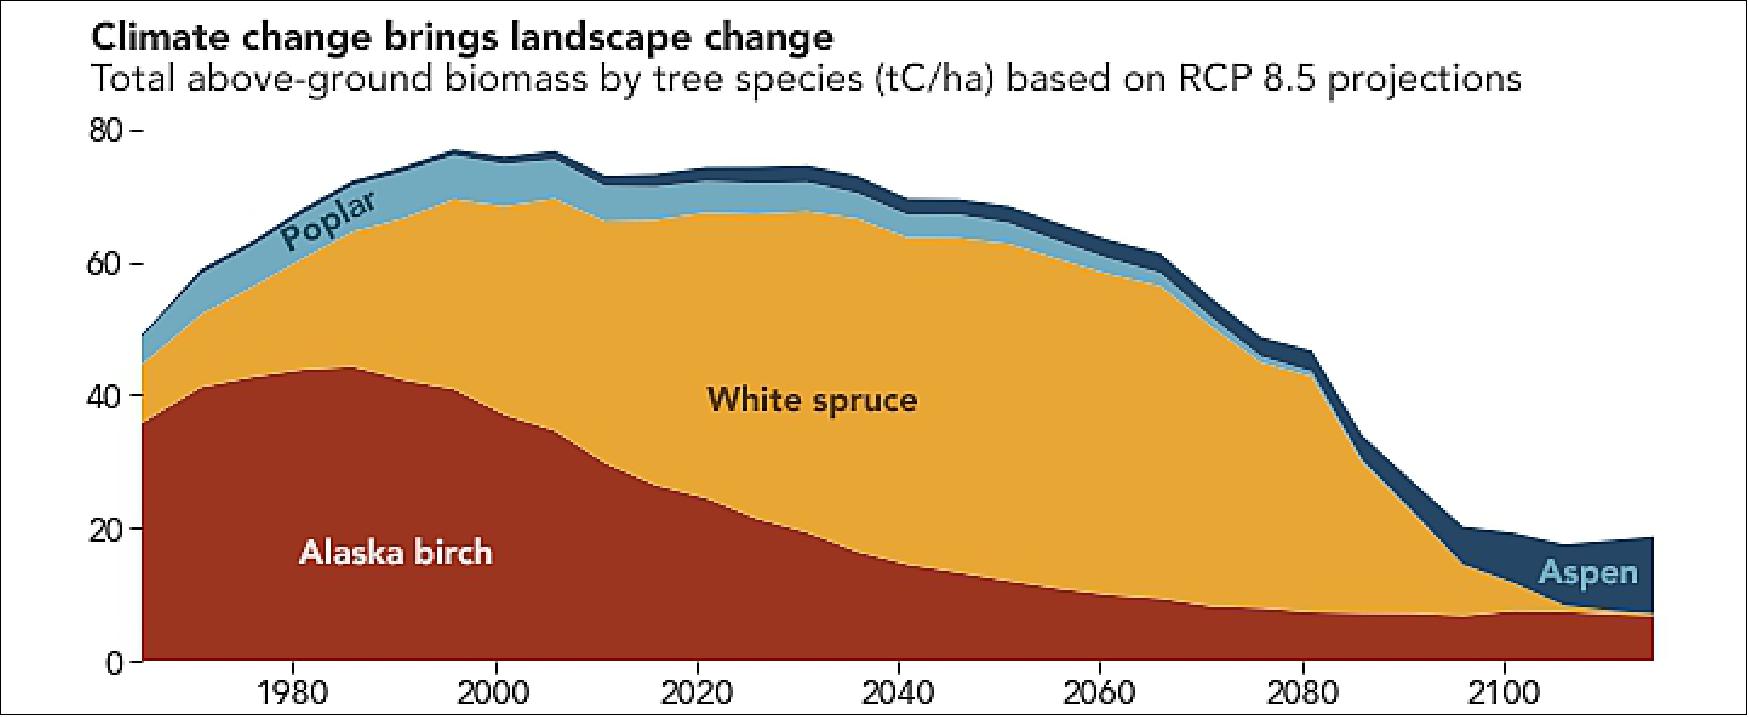 Figure 13: In this plot, overall biomass decreases between 2000 and 2100 under the climate scenario with no greenhouse gas reduction, and the proportions of species also changes. The proportion of birches decreases steadily, while white spruce dominates the landscape until the end of the century (image credit: NASA Earth Observatory image by Joshua Stevens, using data courtesy of Foster, A. C., et al. (2019), and data from NASA/METI/AIST/Japan Space Systems, and U.S./Japan ASTER Science Team. Story by Jessica Merzdorf, NASA/GSFC)